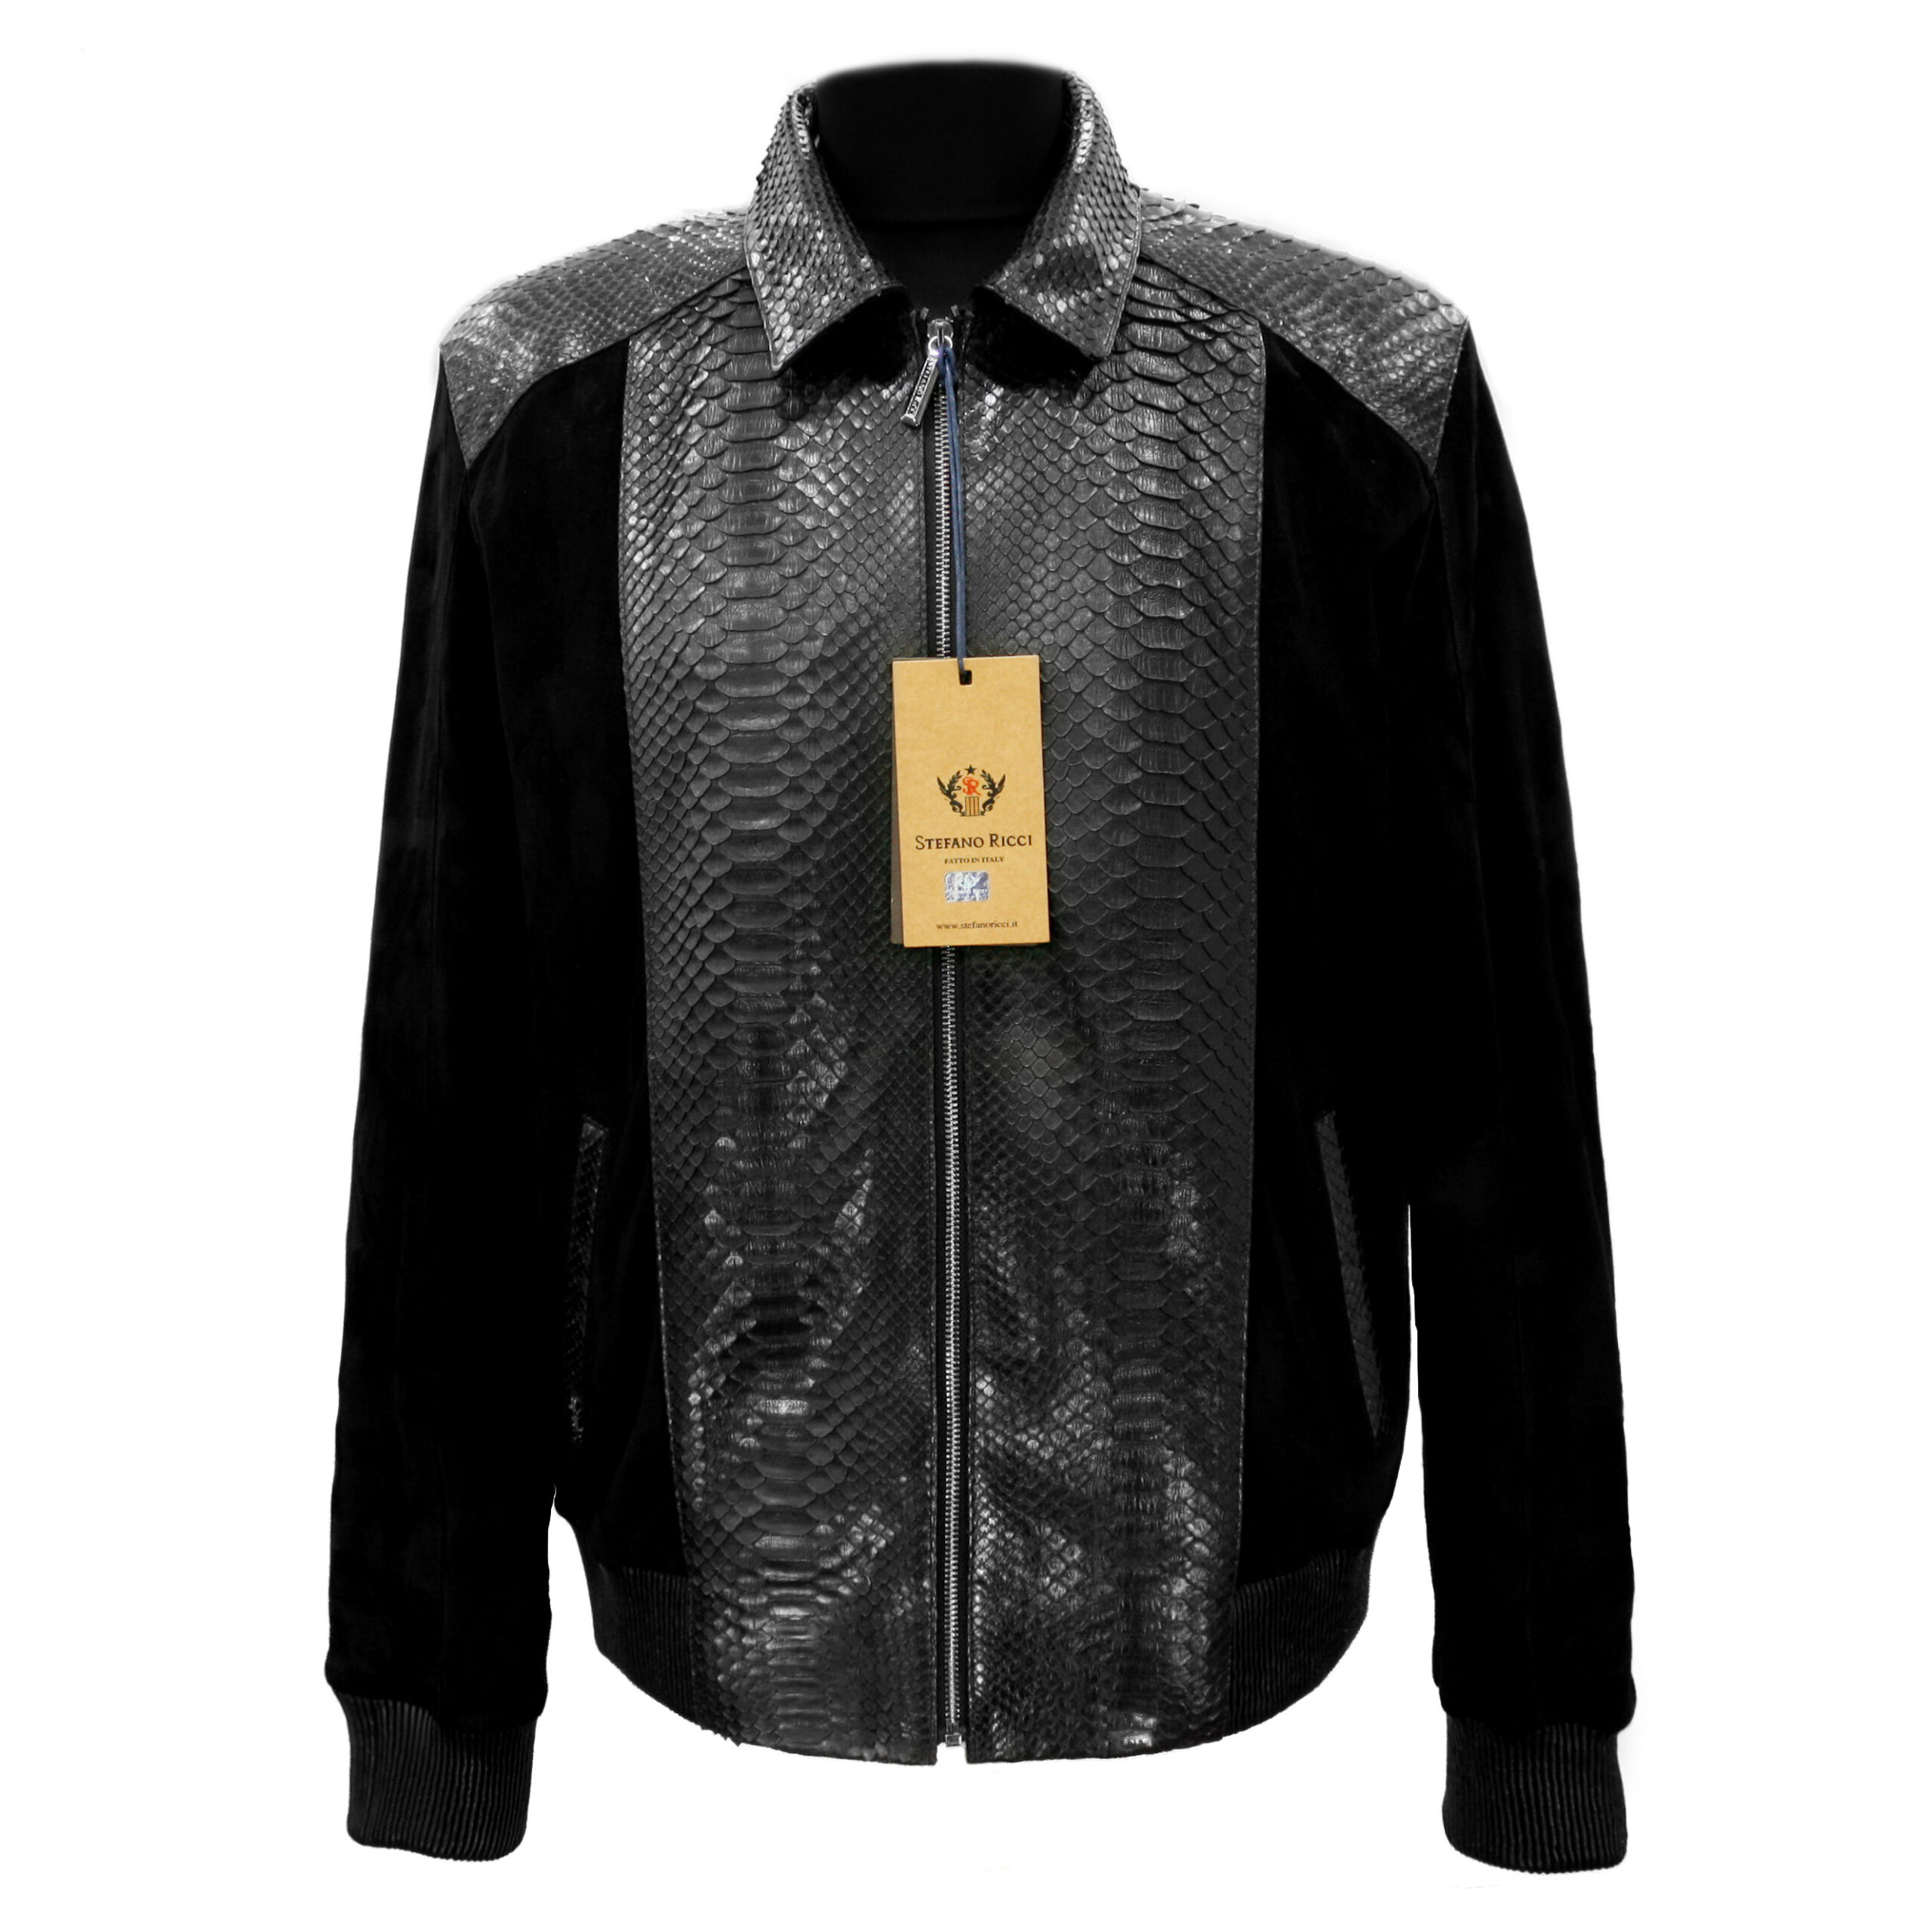 SR Python Leather Suede Jacket - Leather Guys